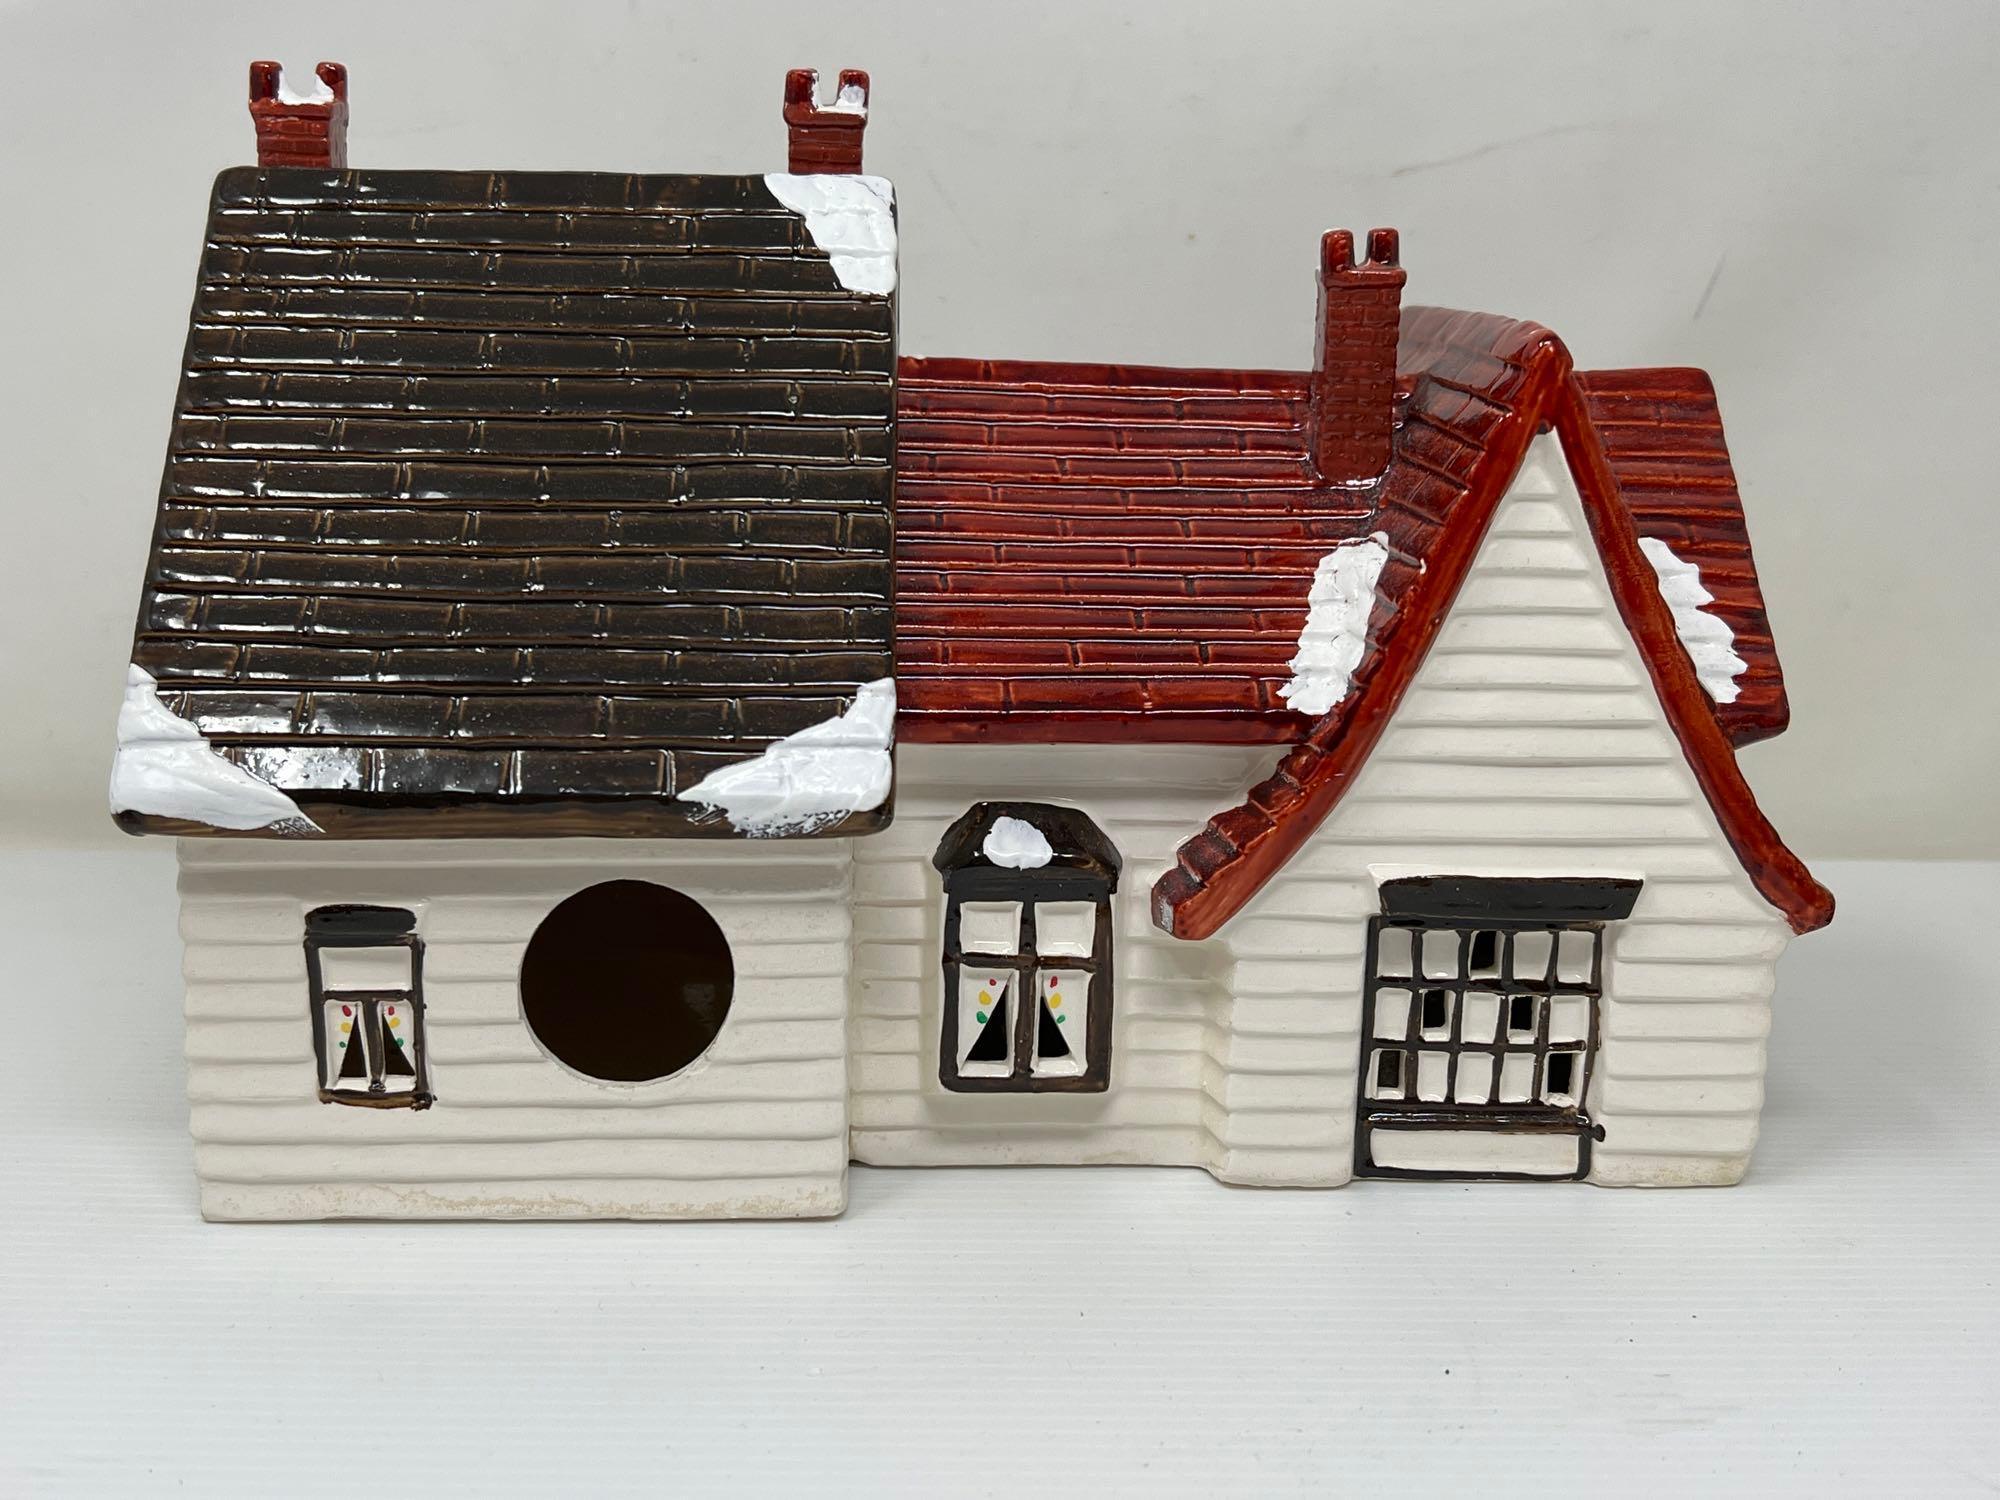 Ceramic Christmas Houses, Buildings, Fire Department, Store Window, Trees